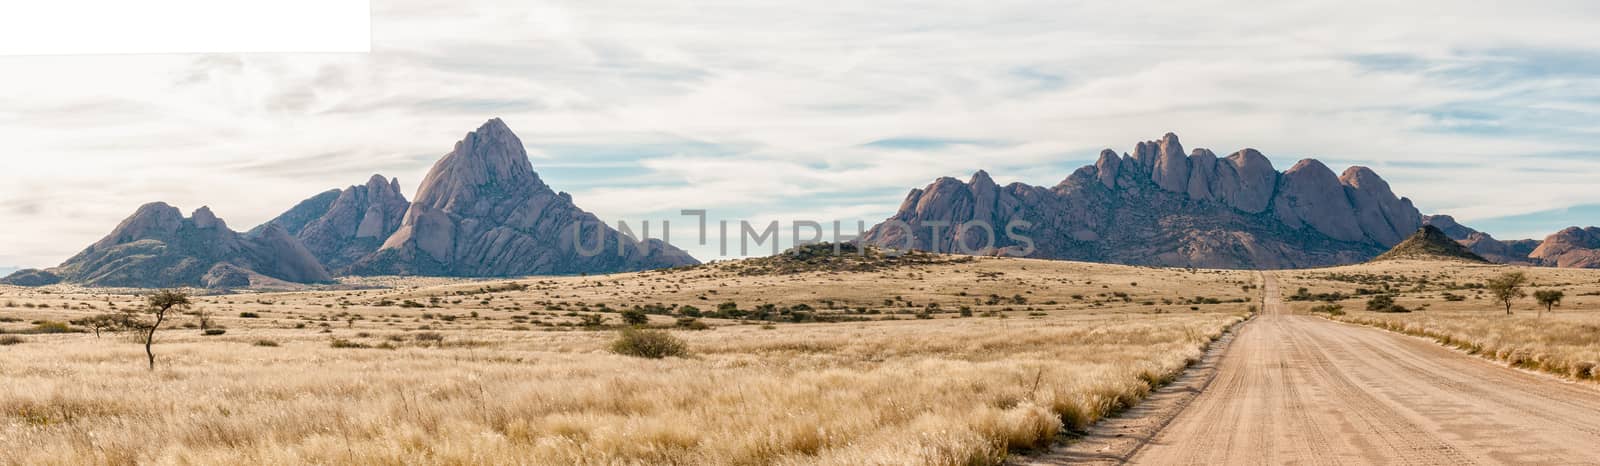 Panorama of Spitzkoppe and Pondok mountains seen from road D3716 by dpreezg